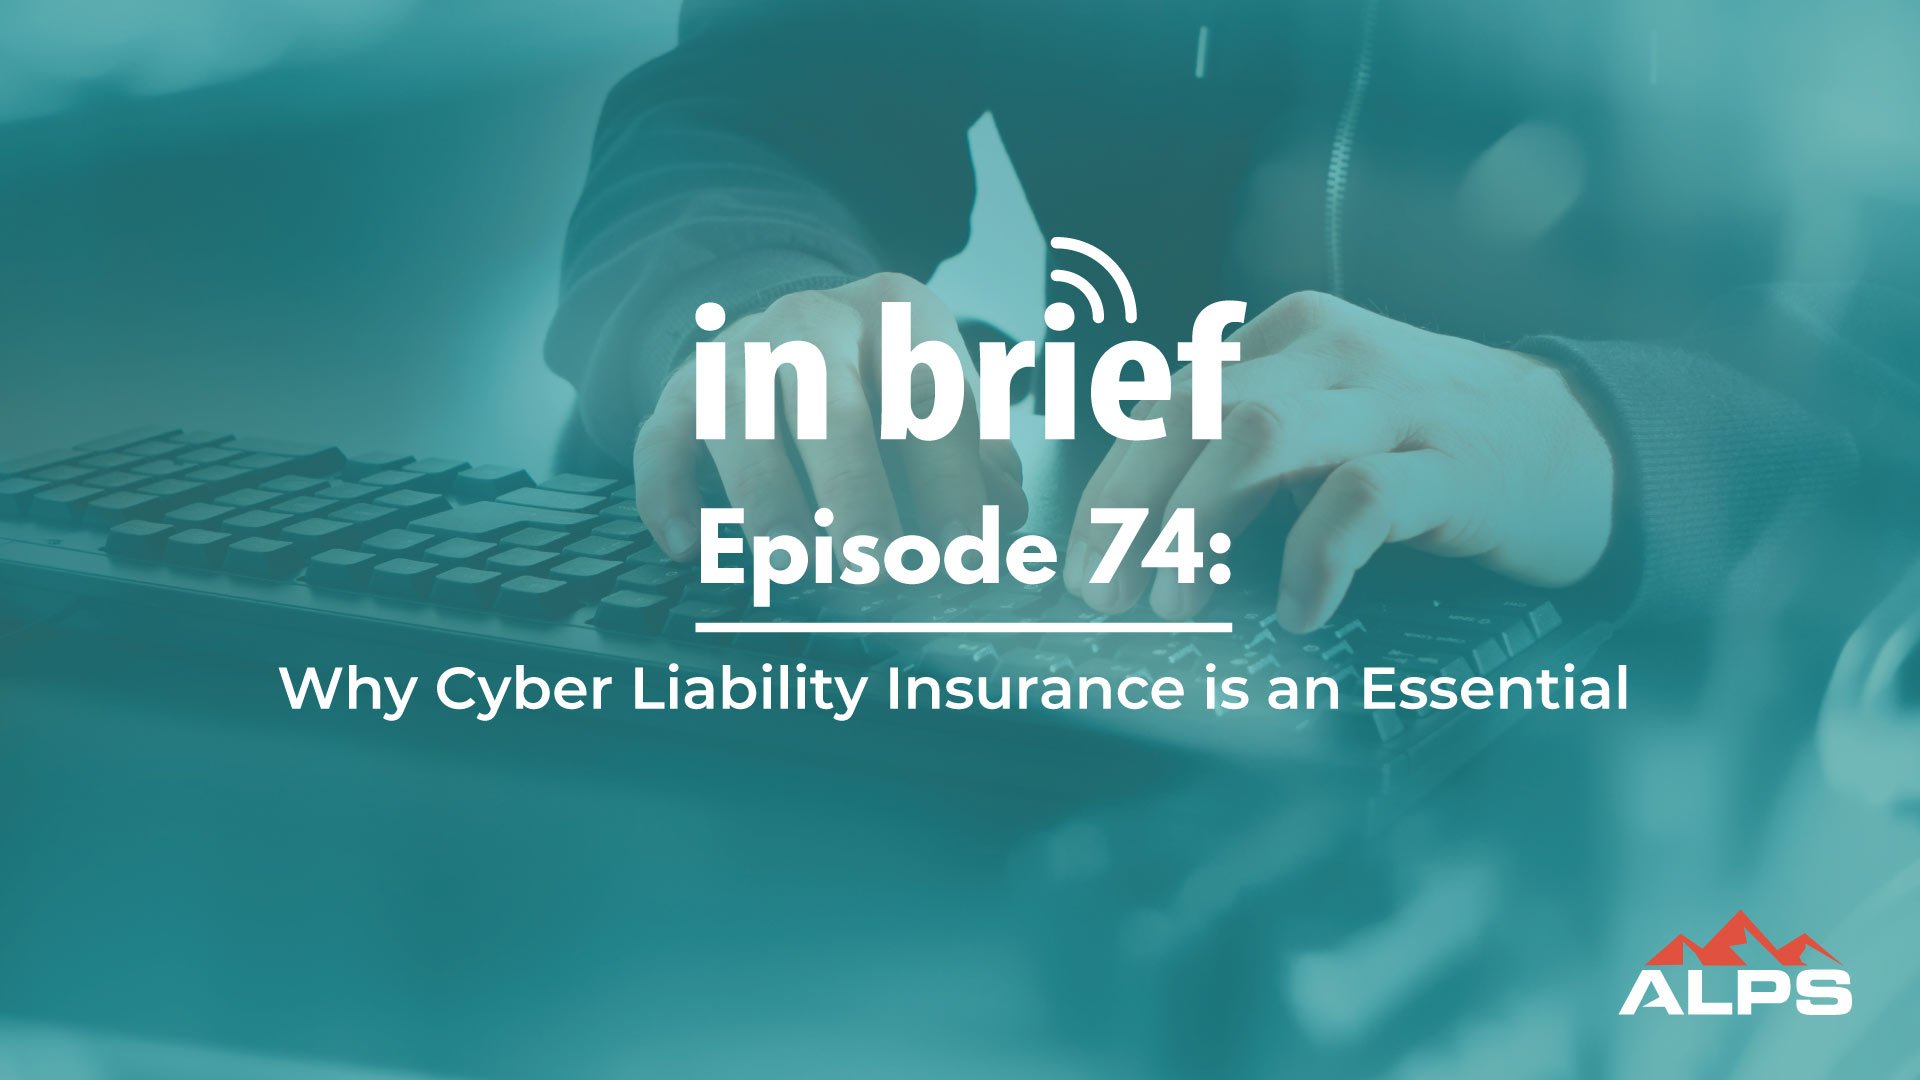 ALPS In Brief - Episode 74: Why Cyber Liability Insurance is an Essential